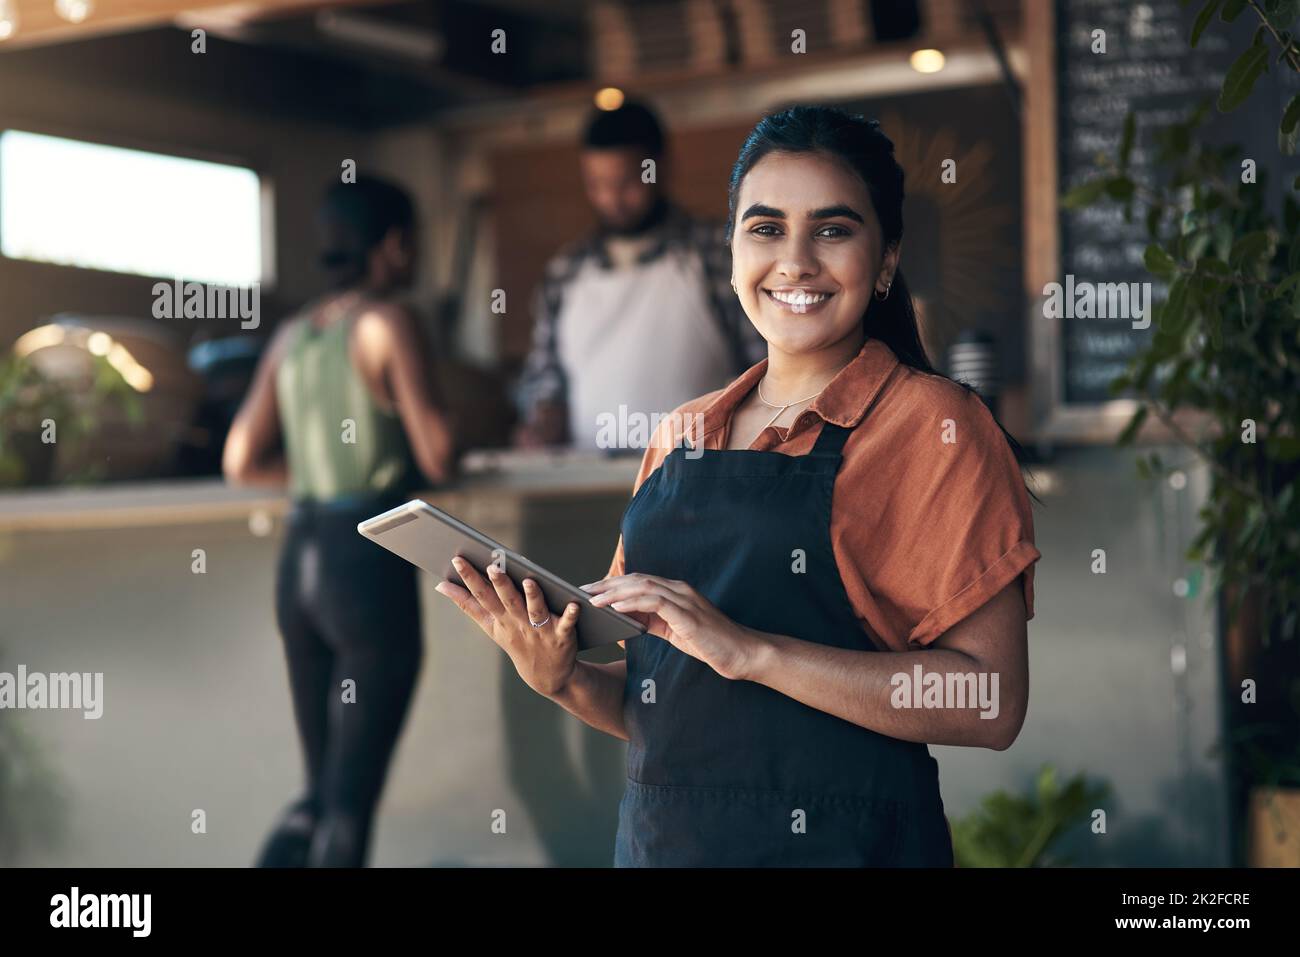 Lets get you seated. Shot of an attractive young woman standing outside her restaurant and using a digital tablet. Stock Photo